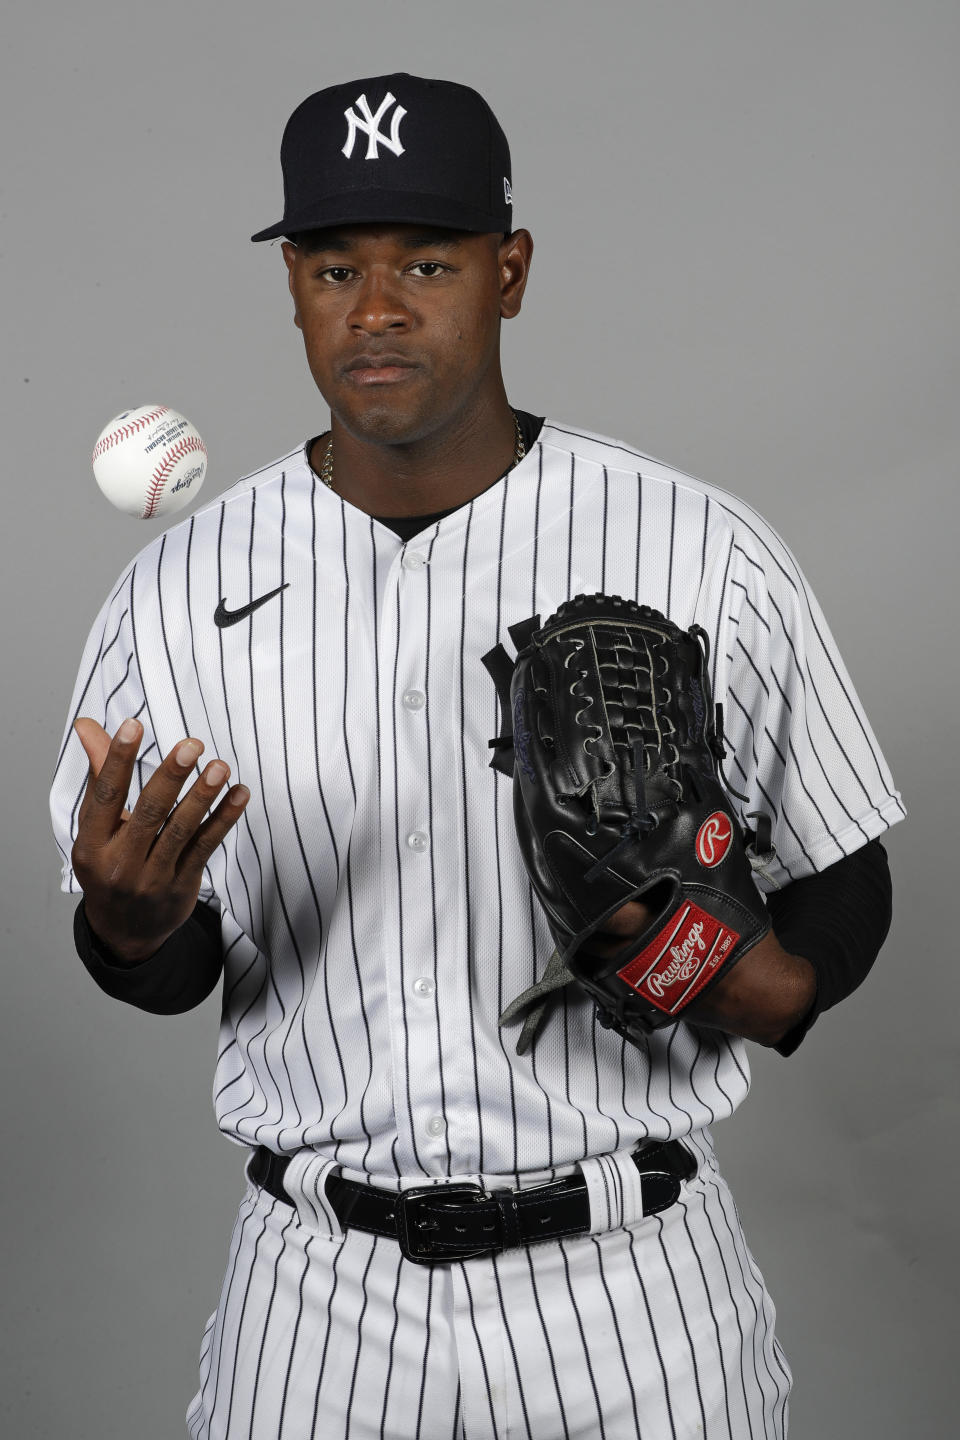 FILE - This is a Feb. 20, 2020, file photo showing New York Yankees' Luis Severino. Severino needs Tommy John surgery and will miss the 2020 season, another setback for the two-time All-Star and the rotation of the AL East favorites. “His plan is to have it done as soon as possible,” Yankees general manager Brian Cashman said Tuesday, Feb. 25, 2020. (AP Photo/Frank Franklin II, File)